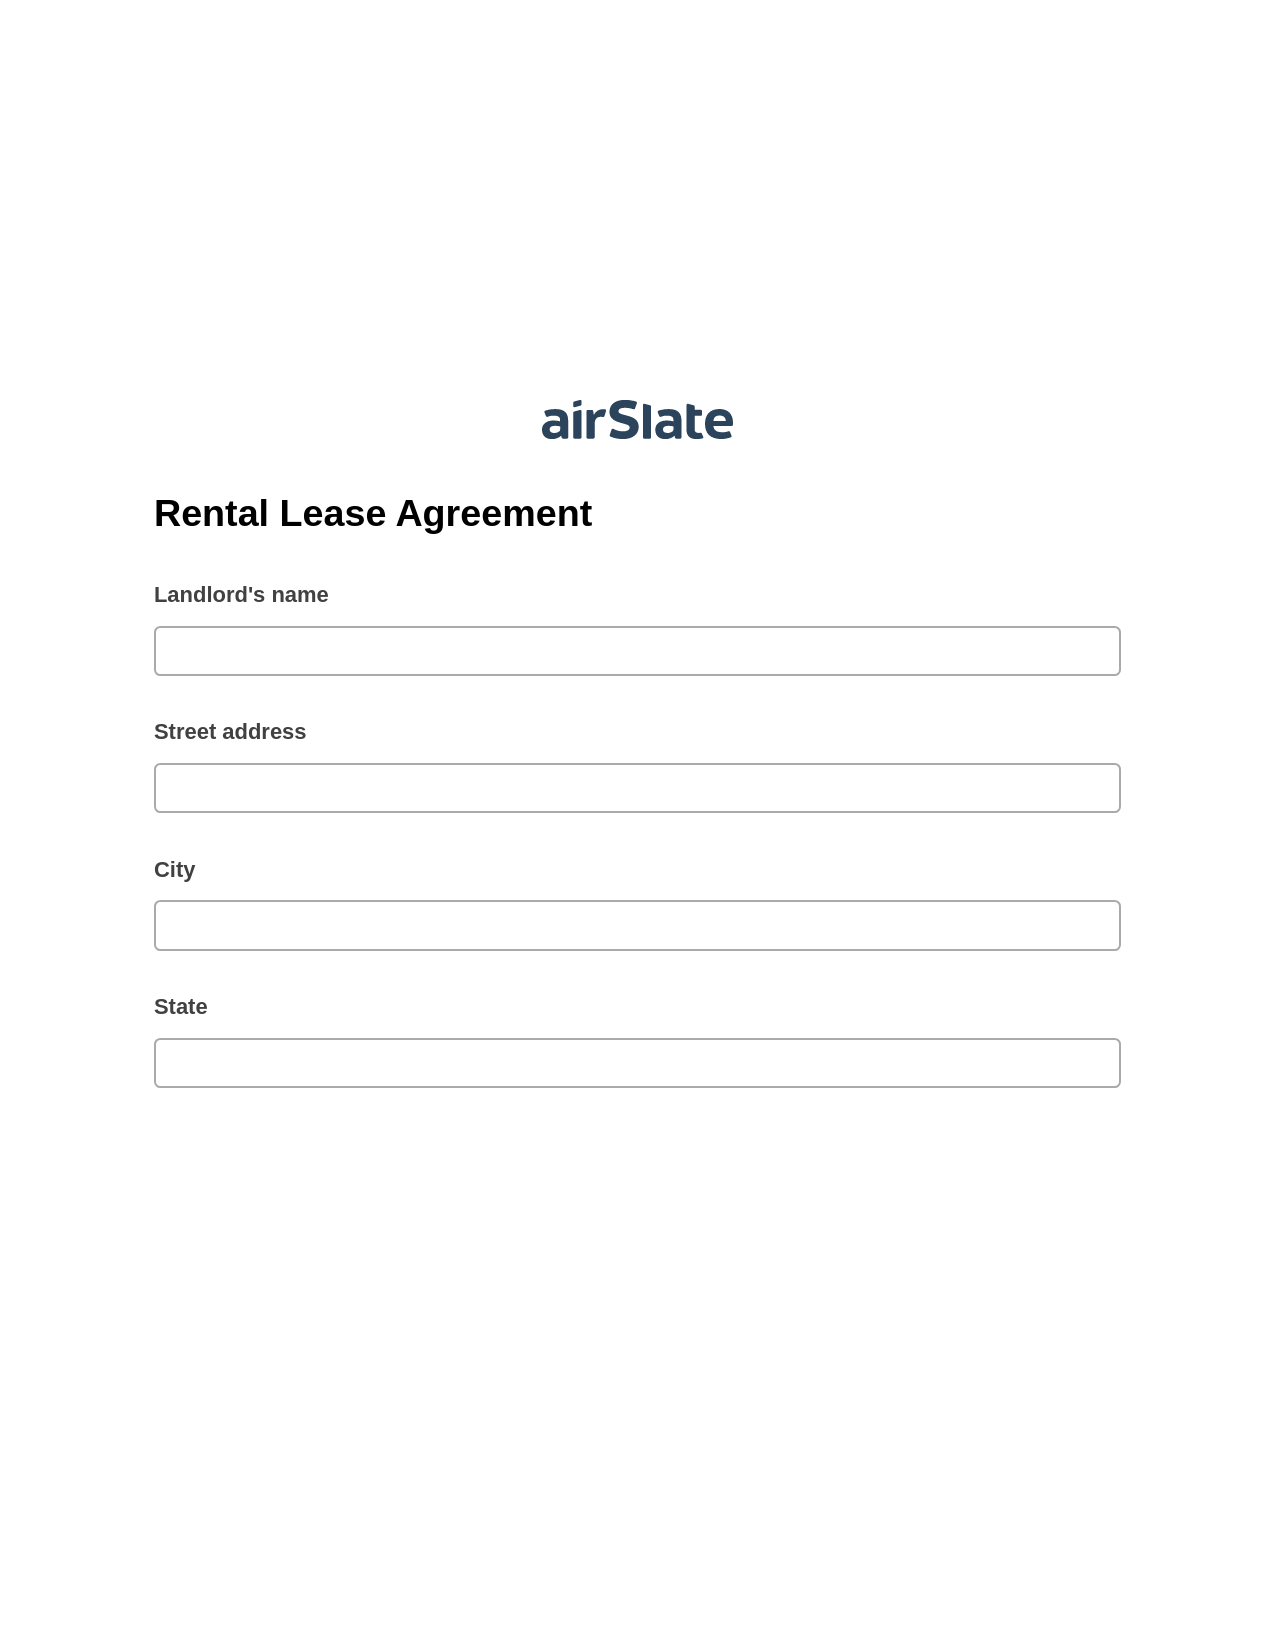 Multirole Rental Lease Agreement Pre-fill from another Slate Bot, Create NetSuite Records Bot, Export to Excel 365 Bot